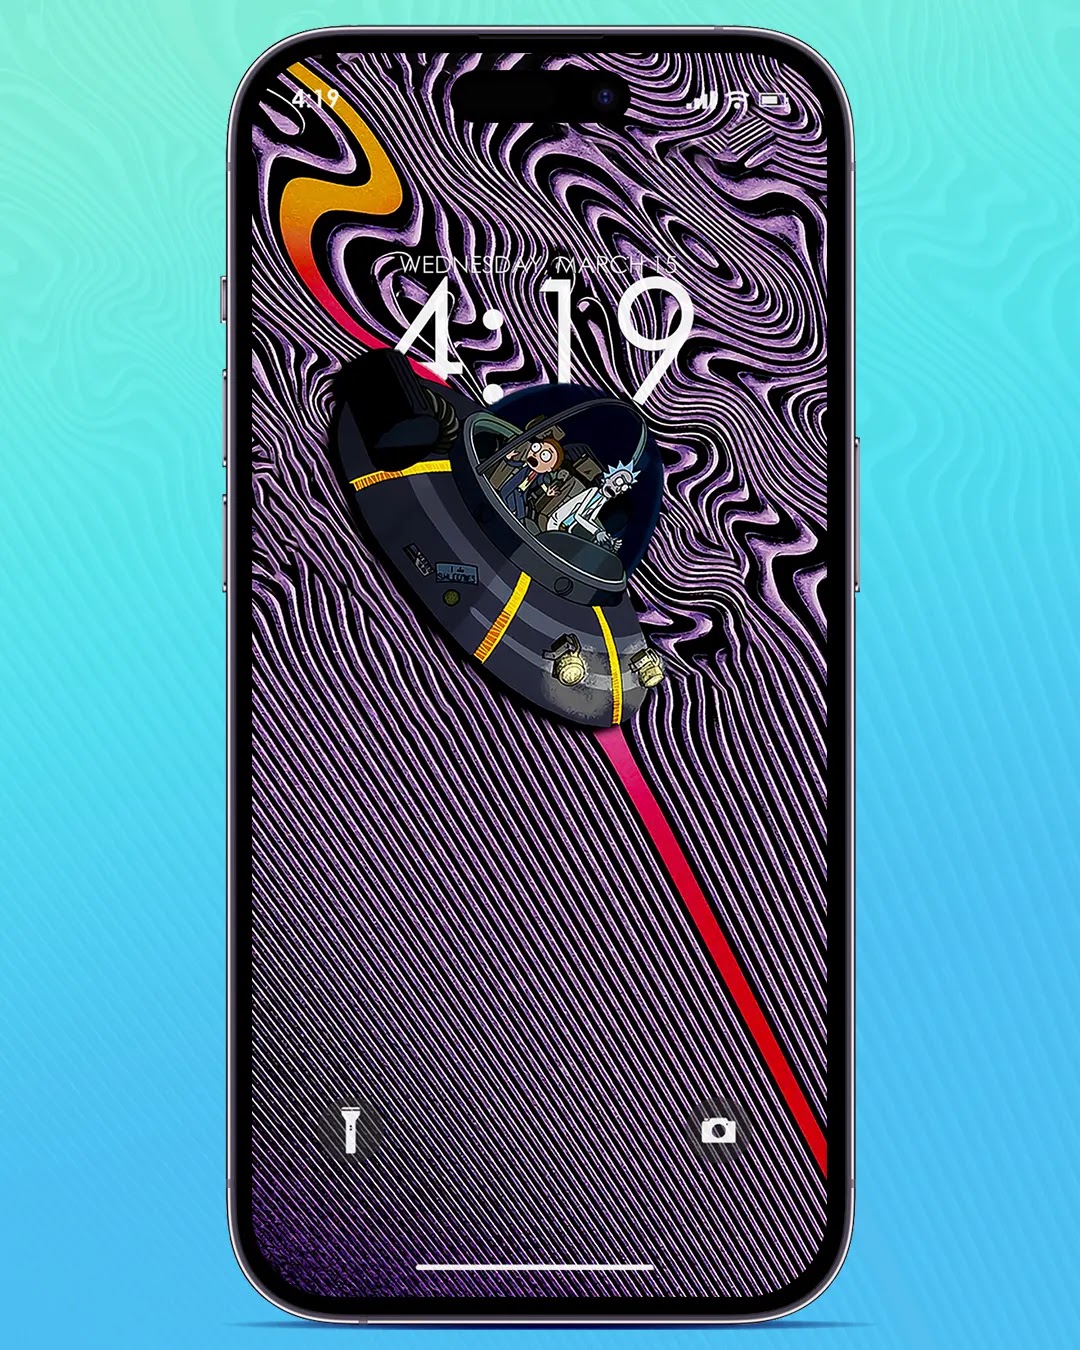 Use Any Music Playlist to Set Your Favorite Album Covers as the Lock Screen  Wallpaper on Your iPhone  iOS  iPhone  Gadget Hacks